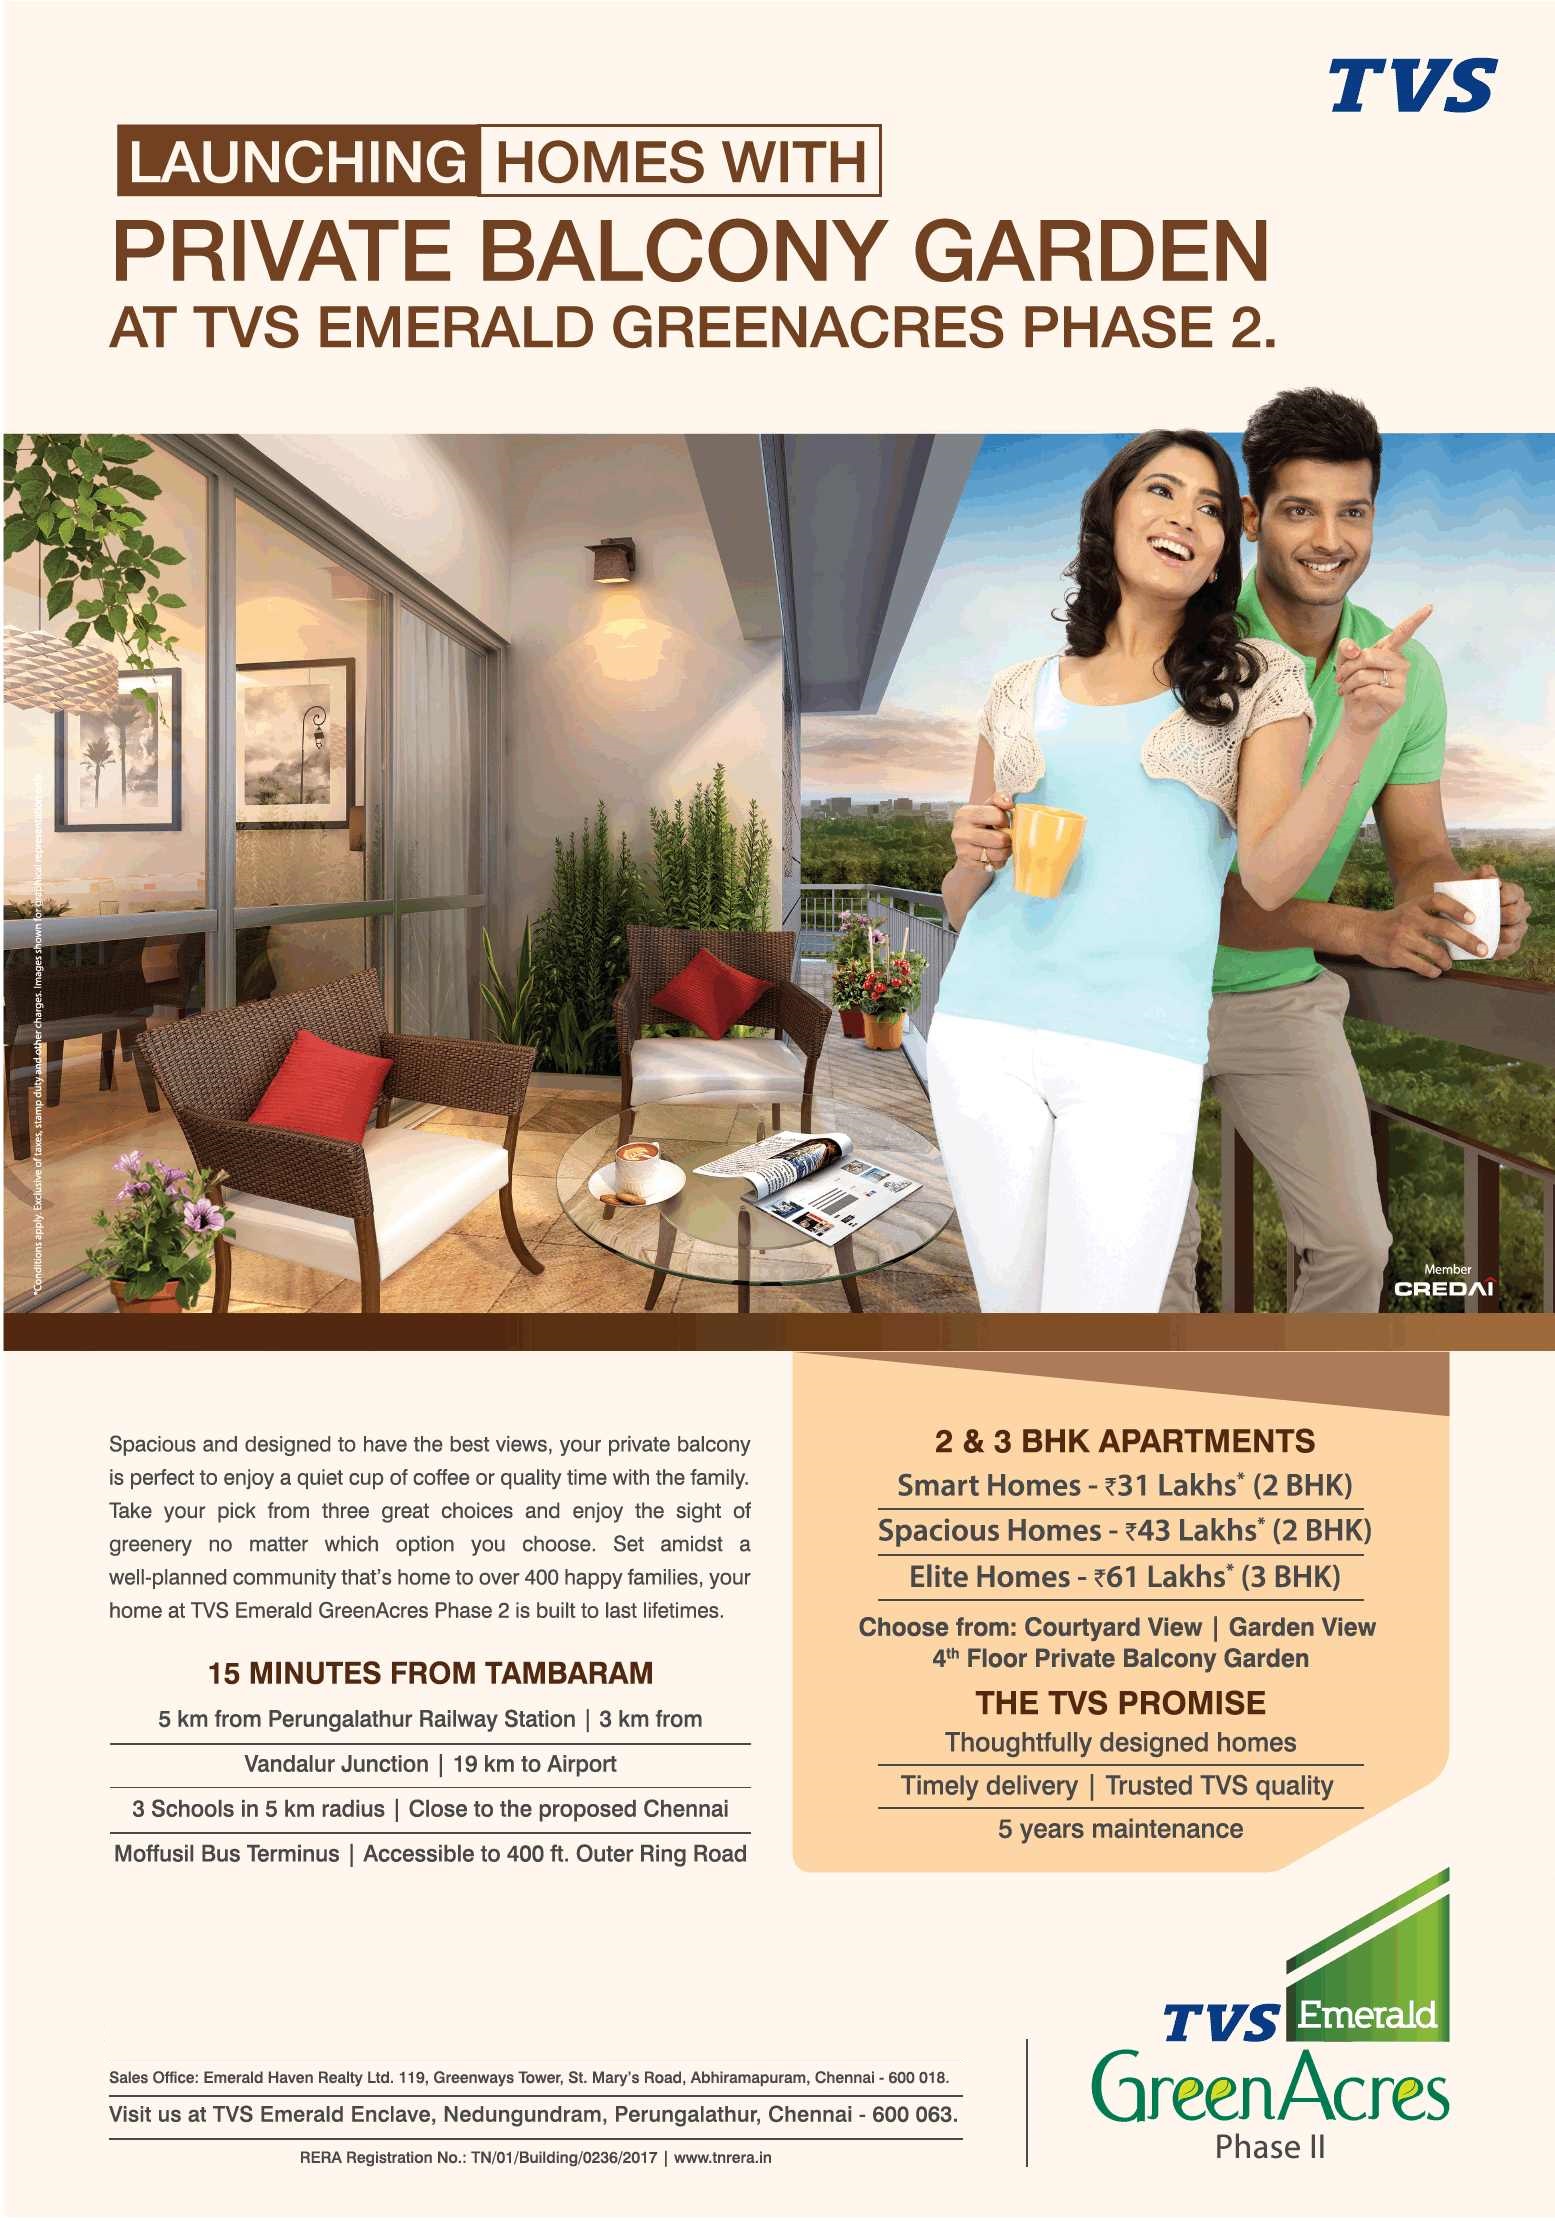 Launching homes with private balcony gardens at TVS Emerald Green Acres in Chennai